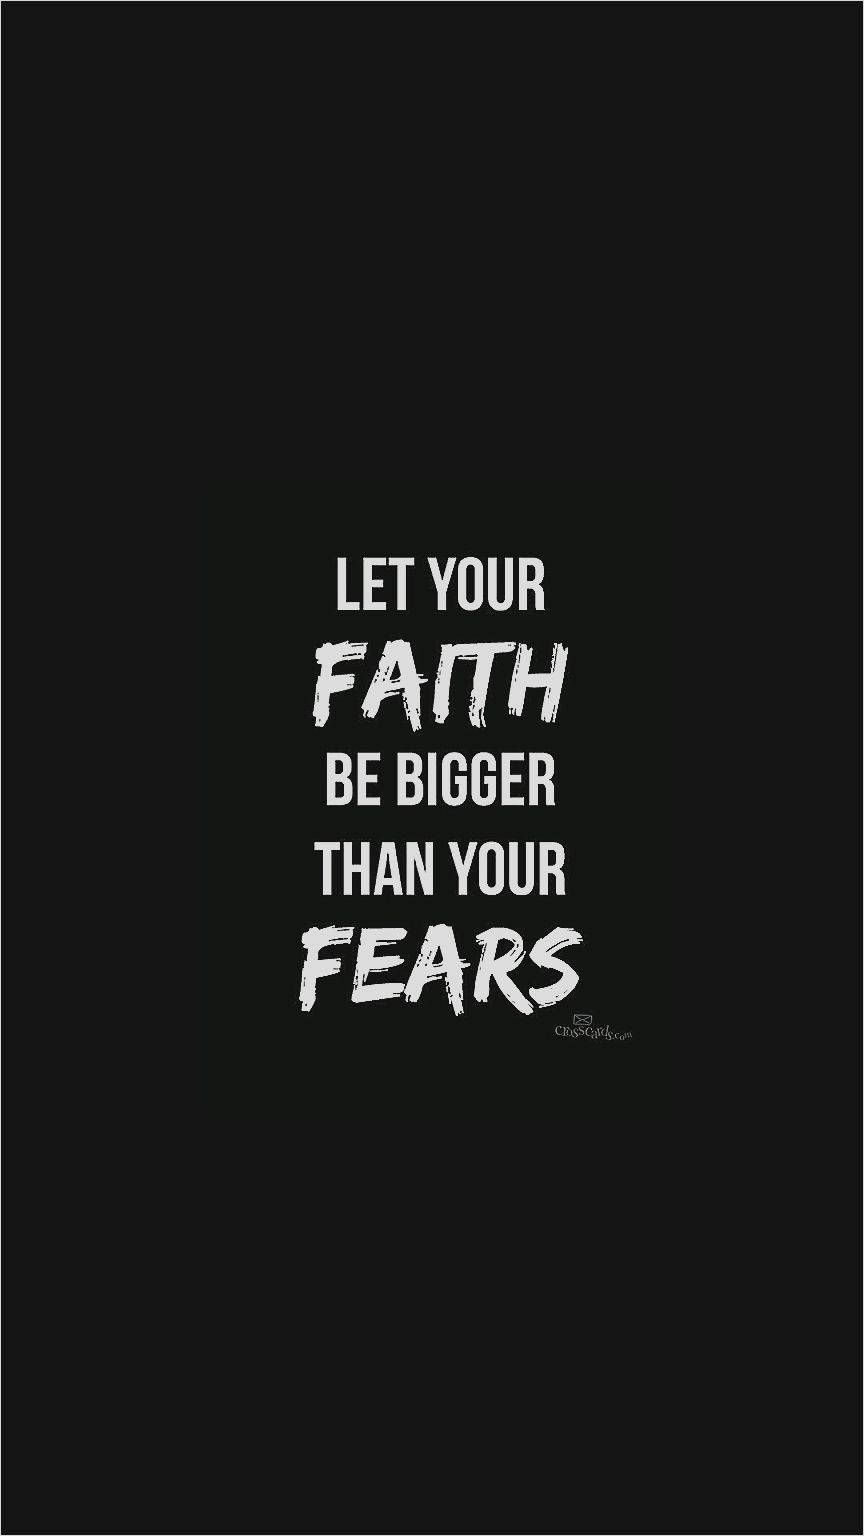 Let your faith be bigger than your fears. - Christian iPhone